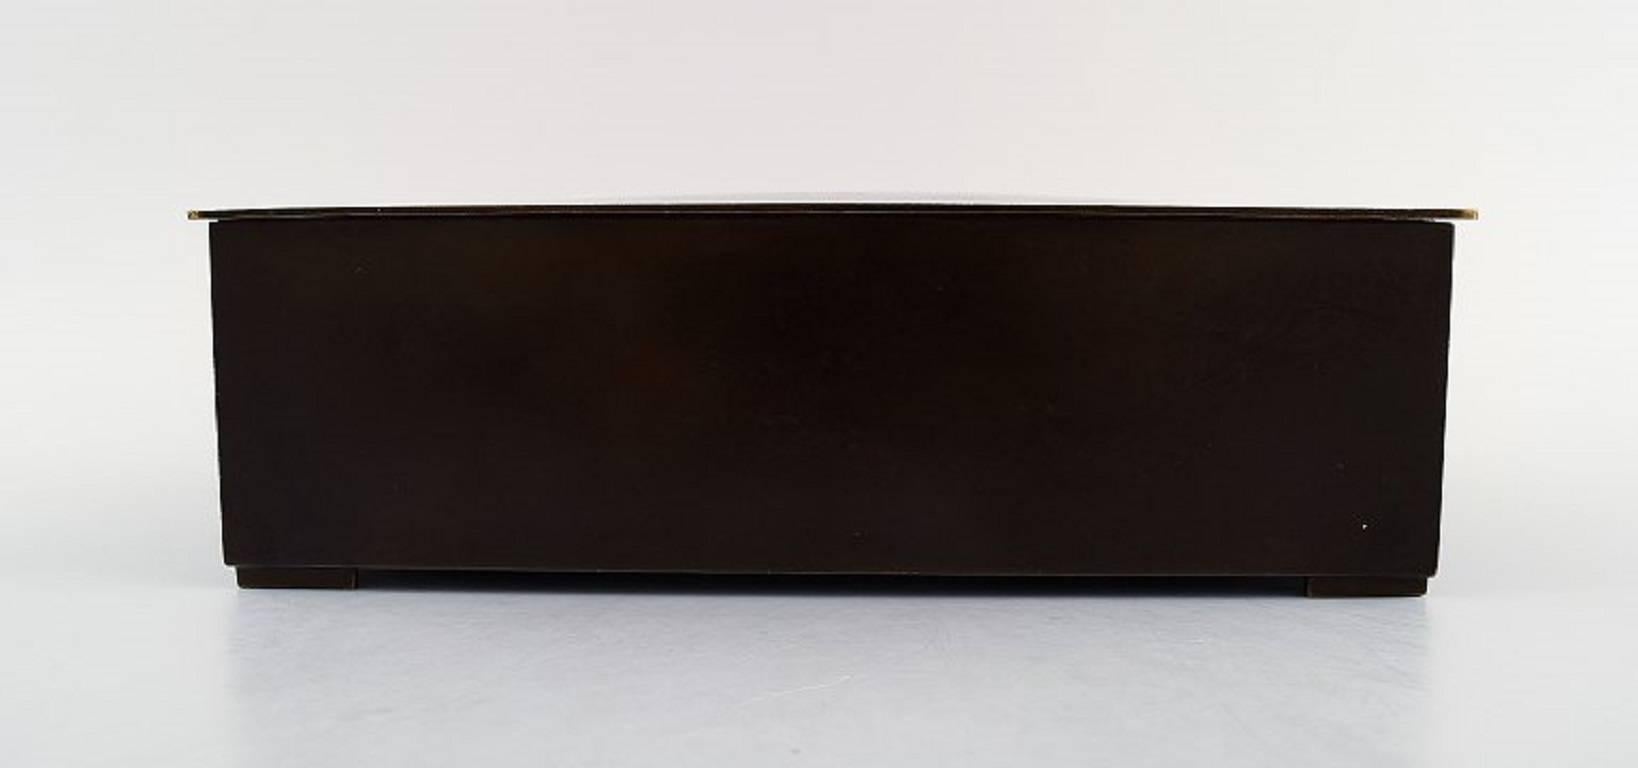 Rare Just Andersen Art Deco box or jewelry box in bronze.

Marked. B 1909.

In good condition, beautiful patina.

Measures: 20 x 14 x 6 cm.